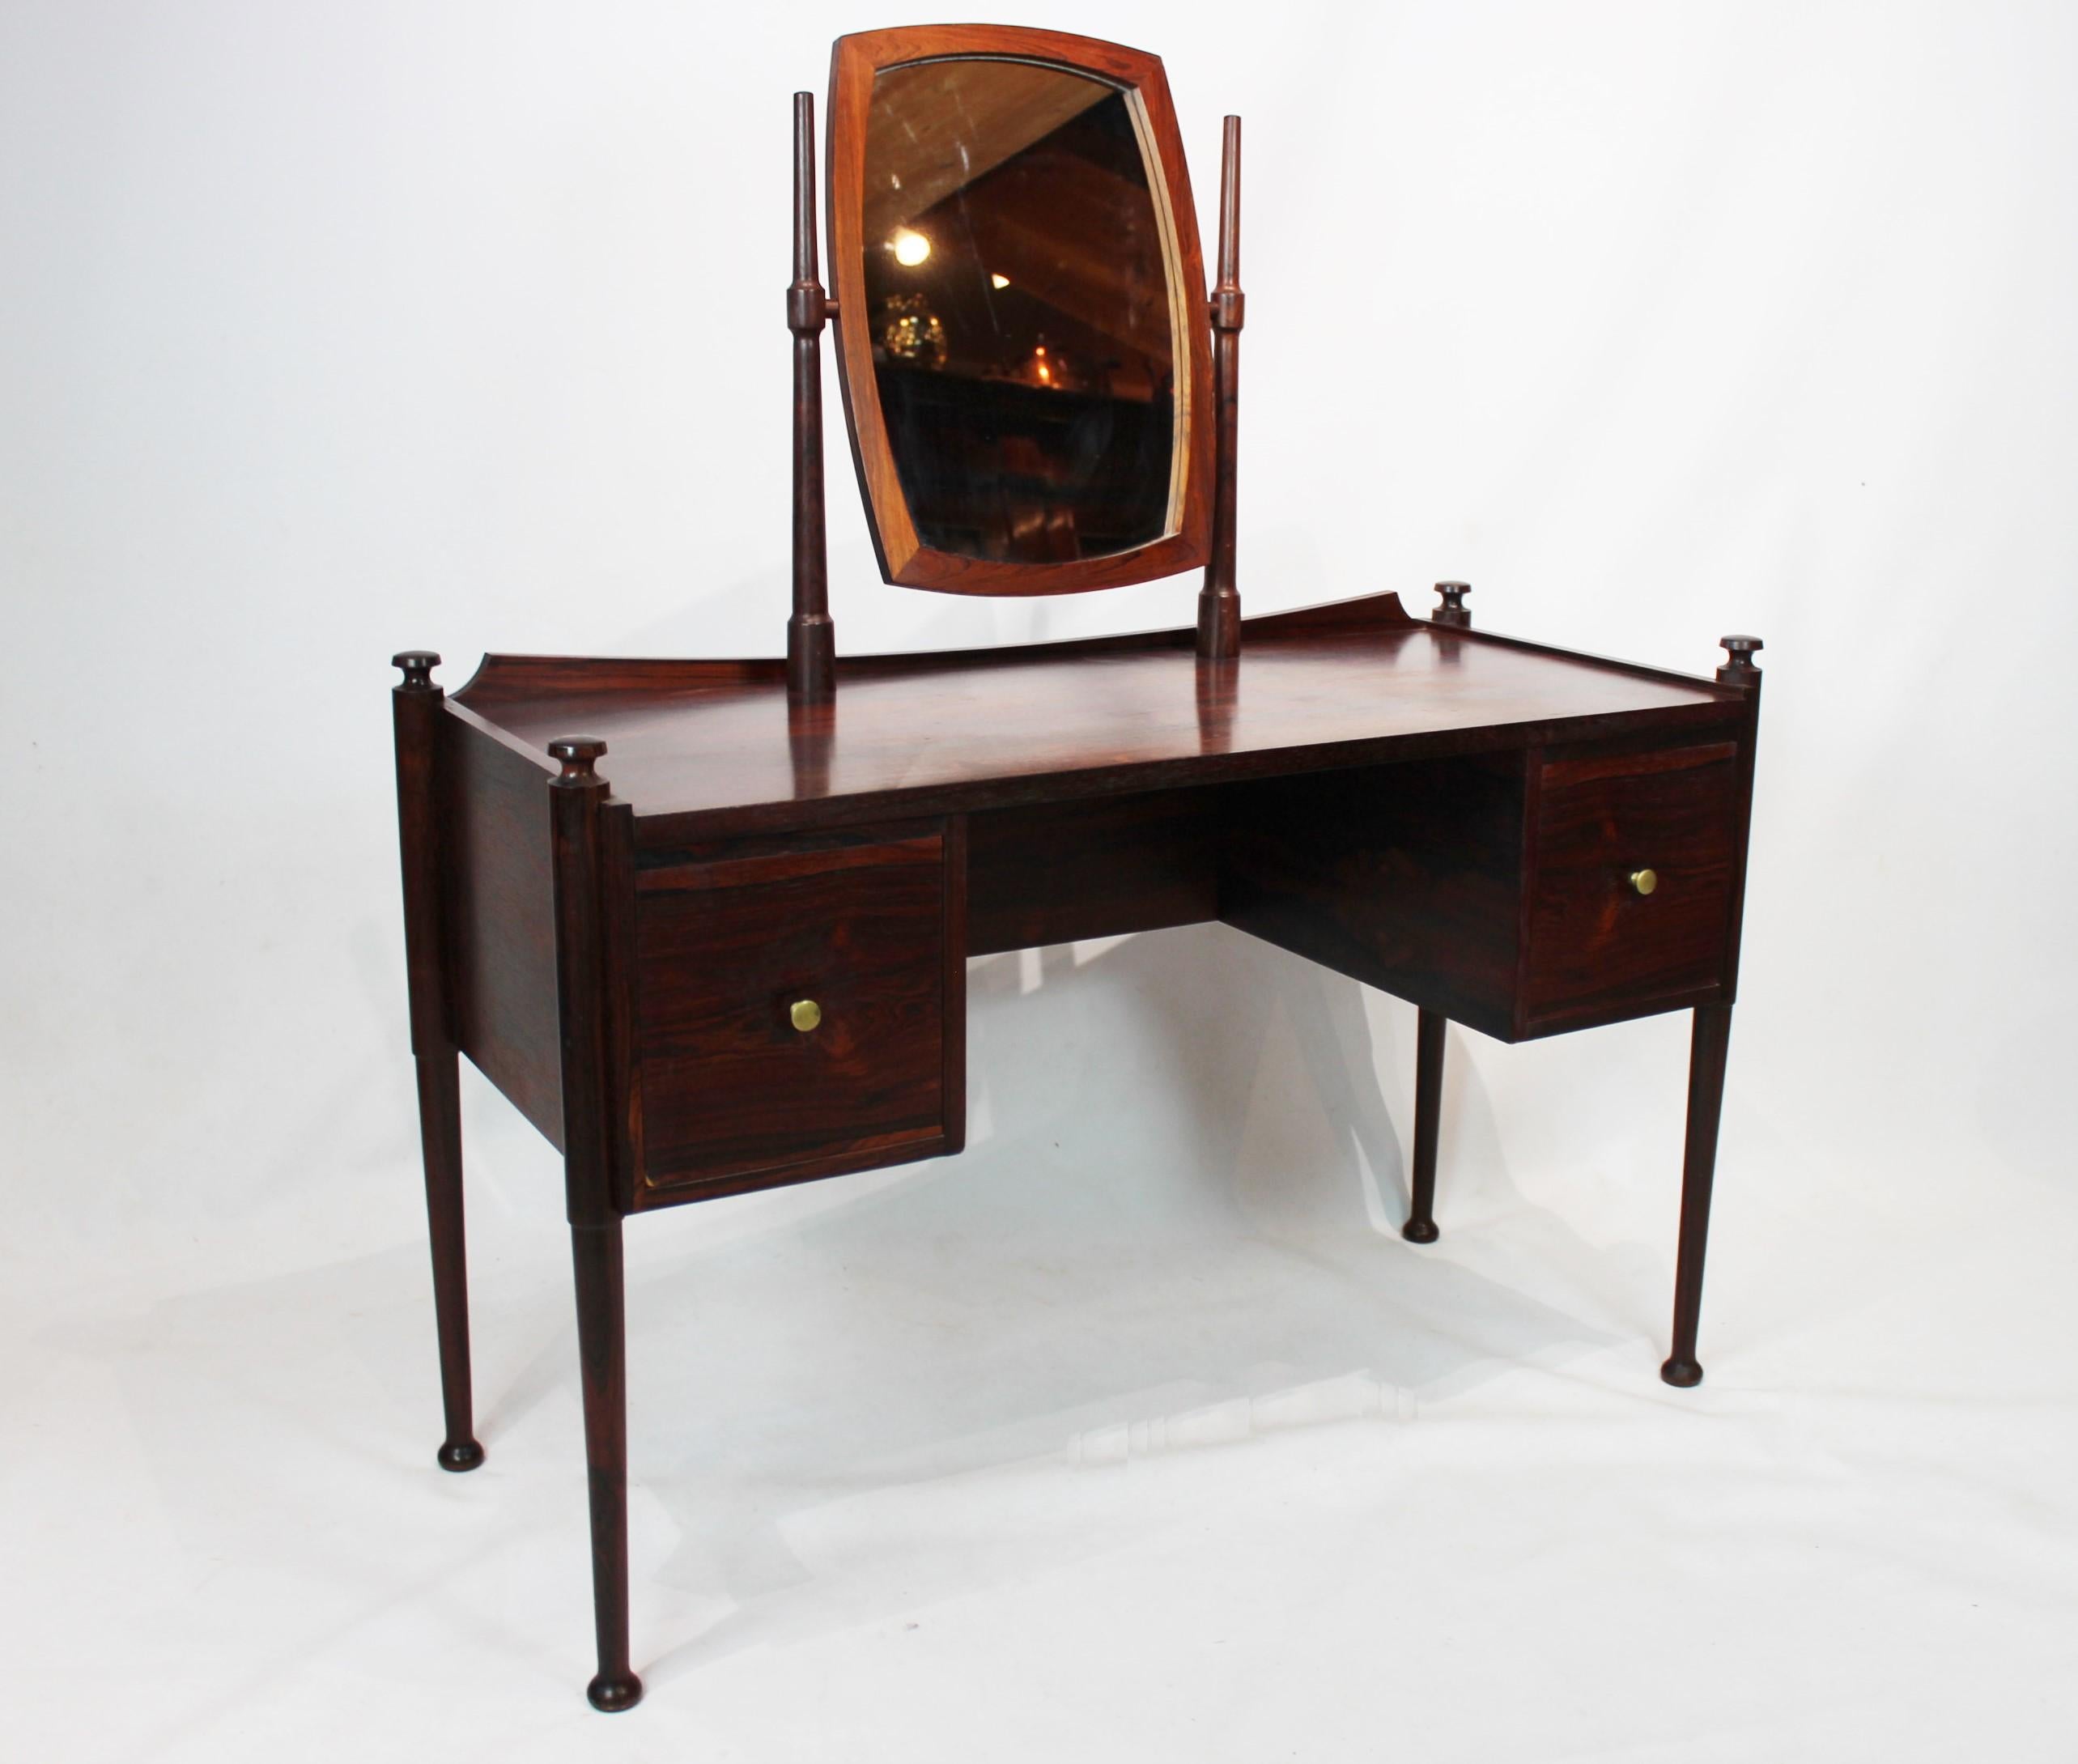 Mid-20th Century Dressing Table in Rosewood of Danish Design from the 1960s